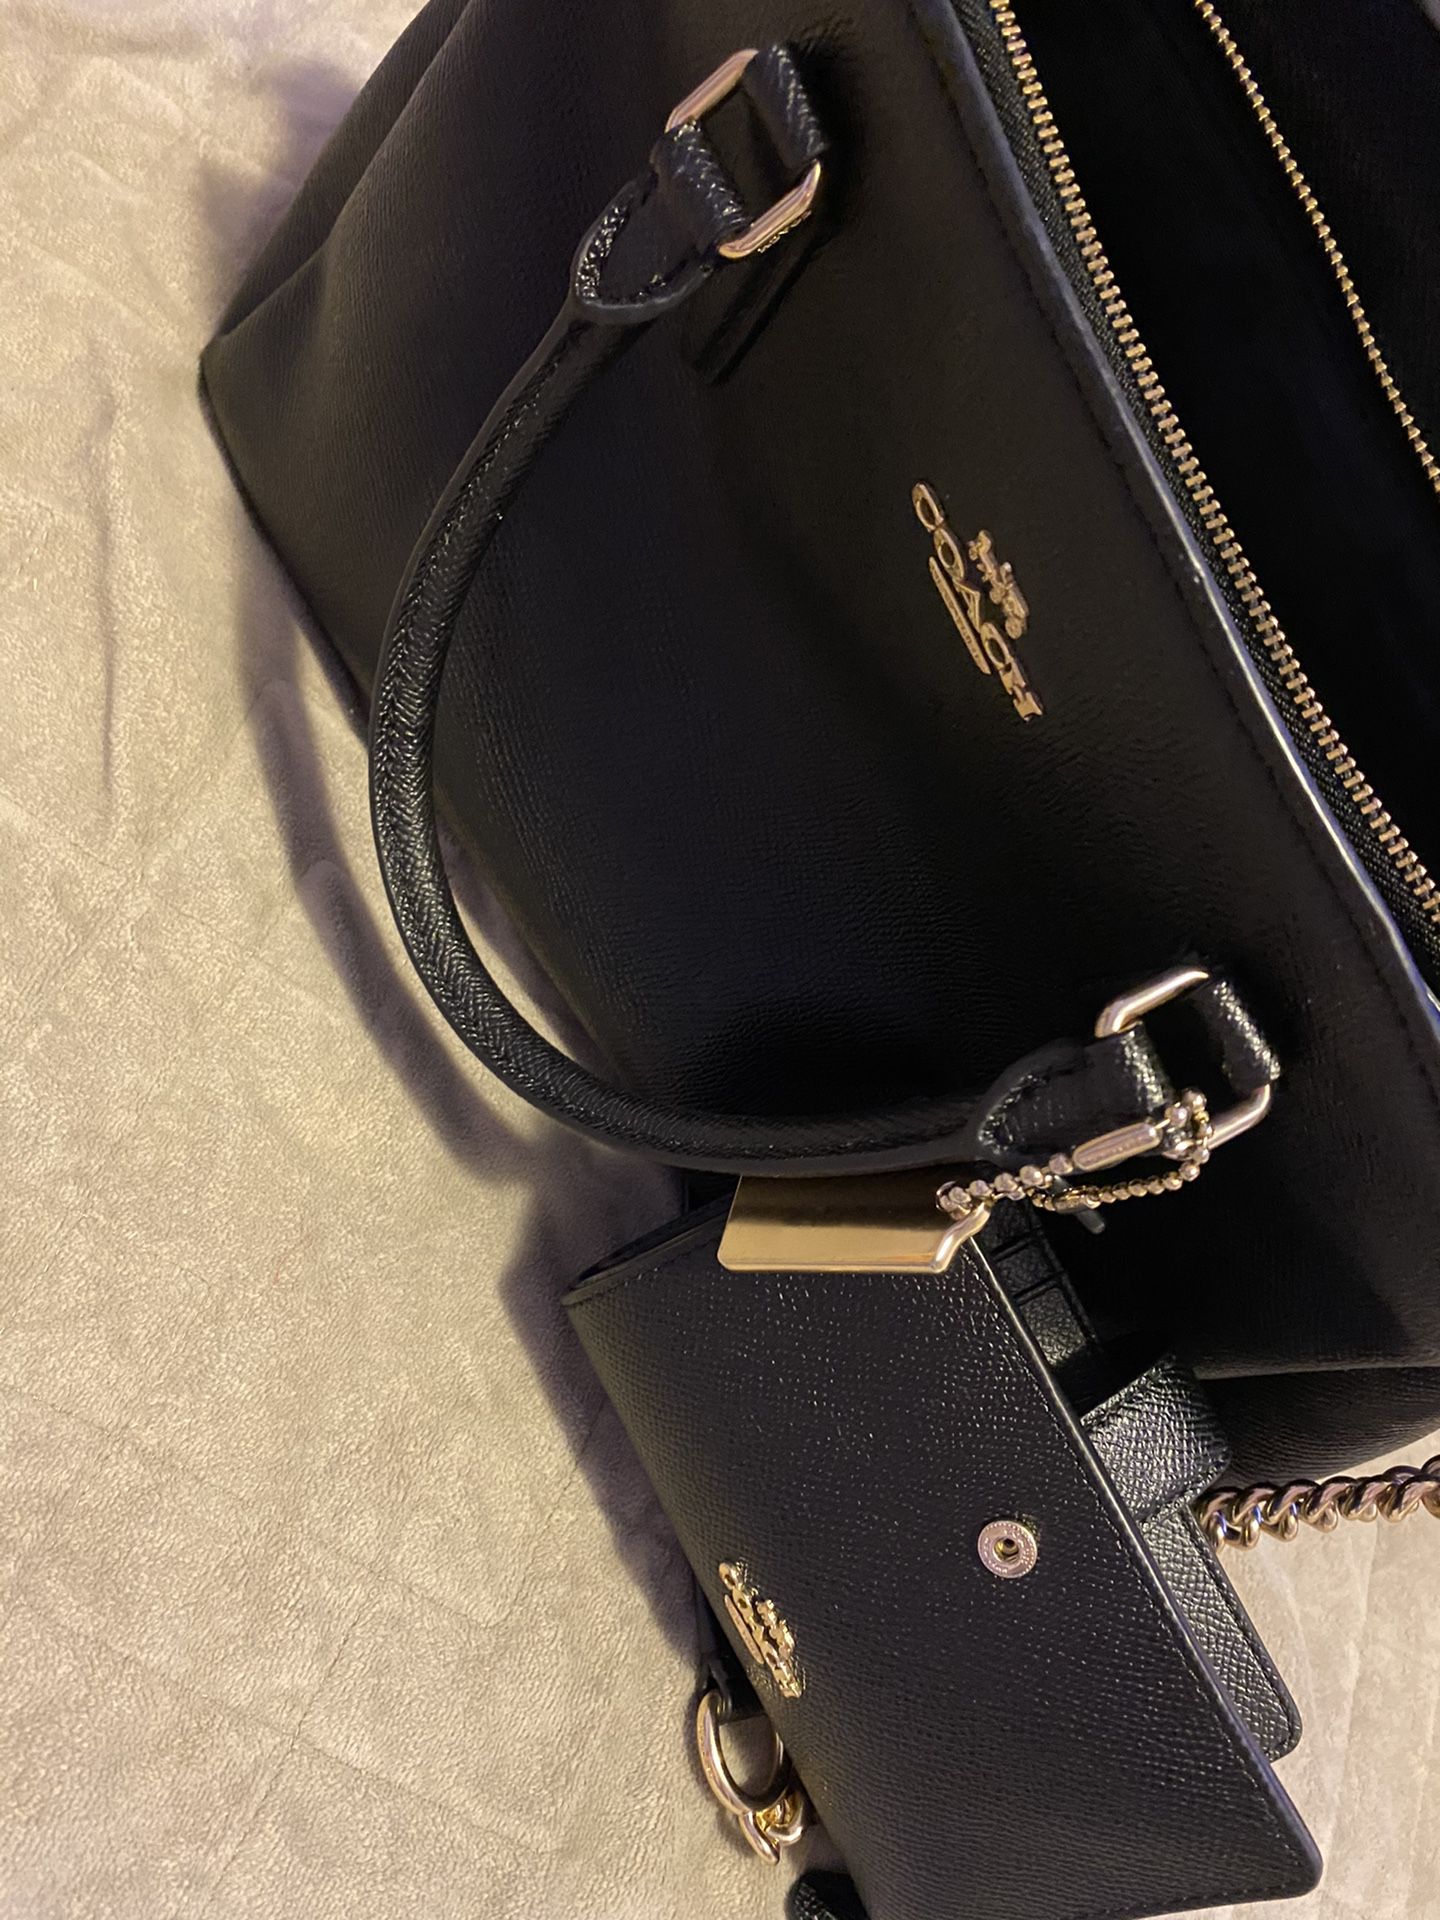 Coach purse and wallet (authentic) like new